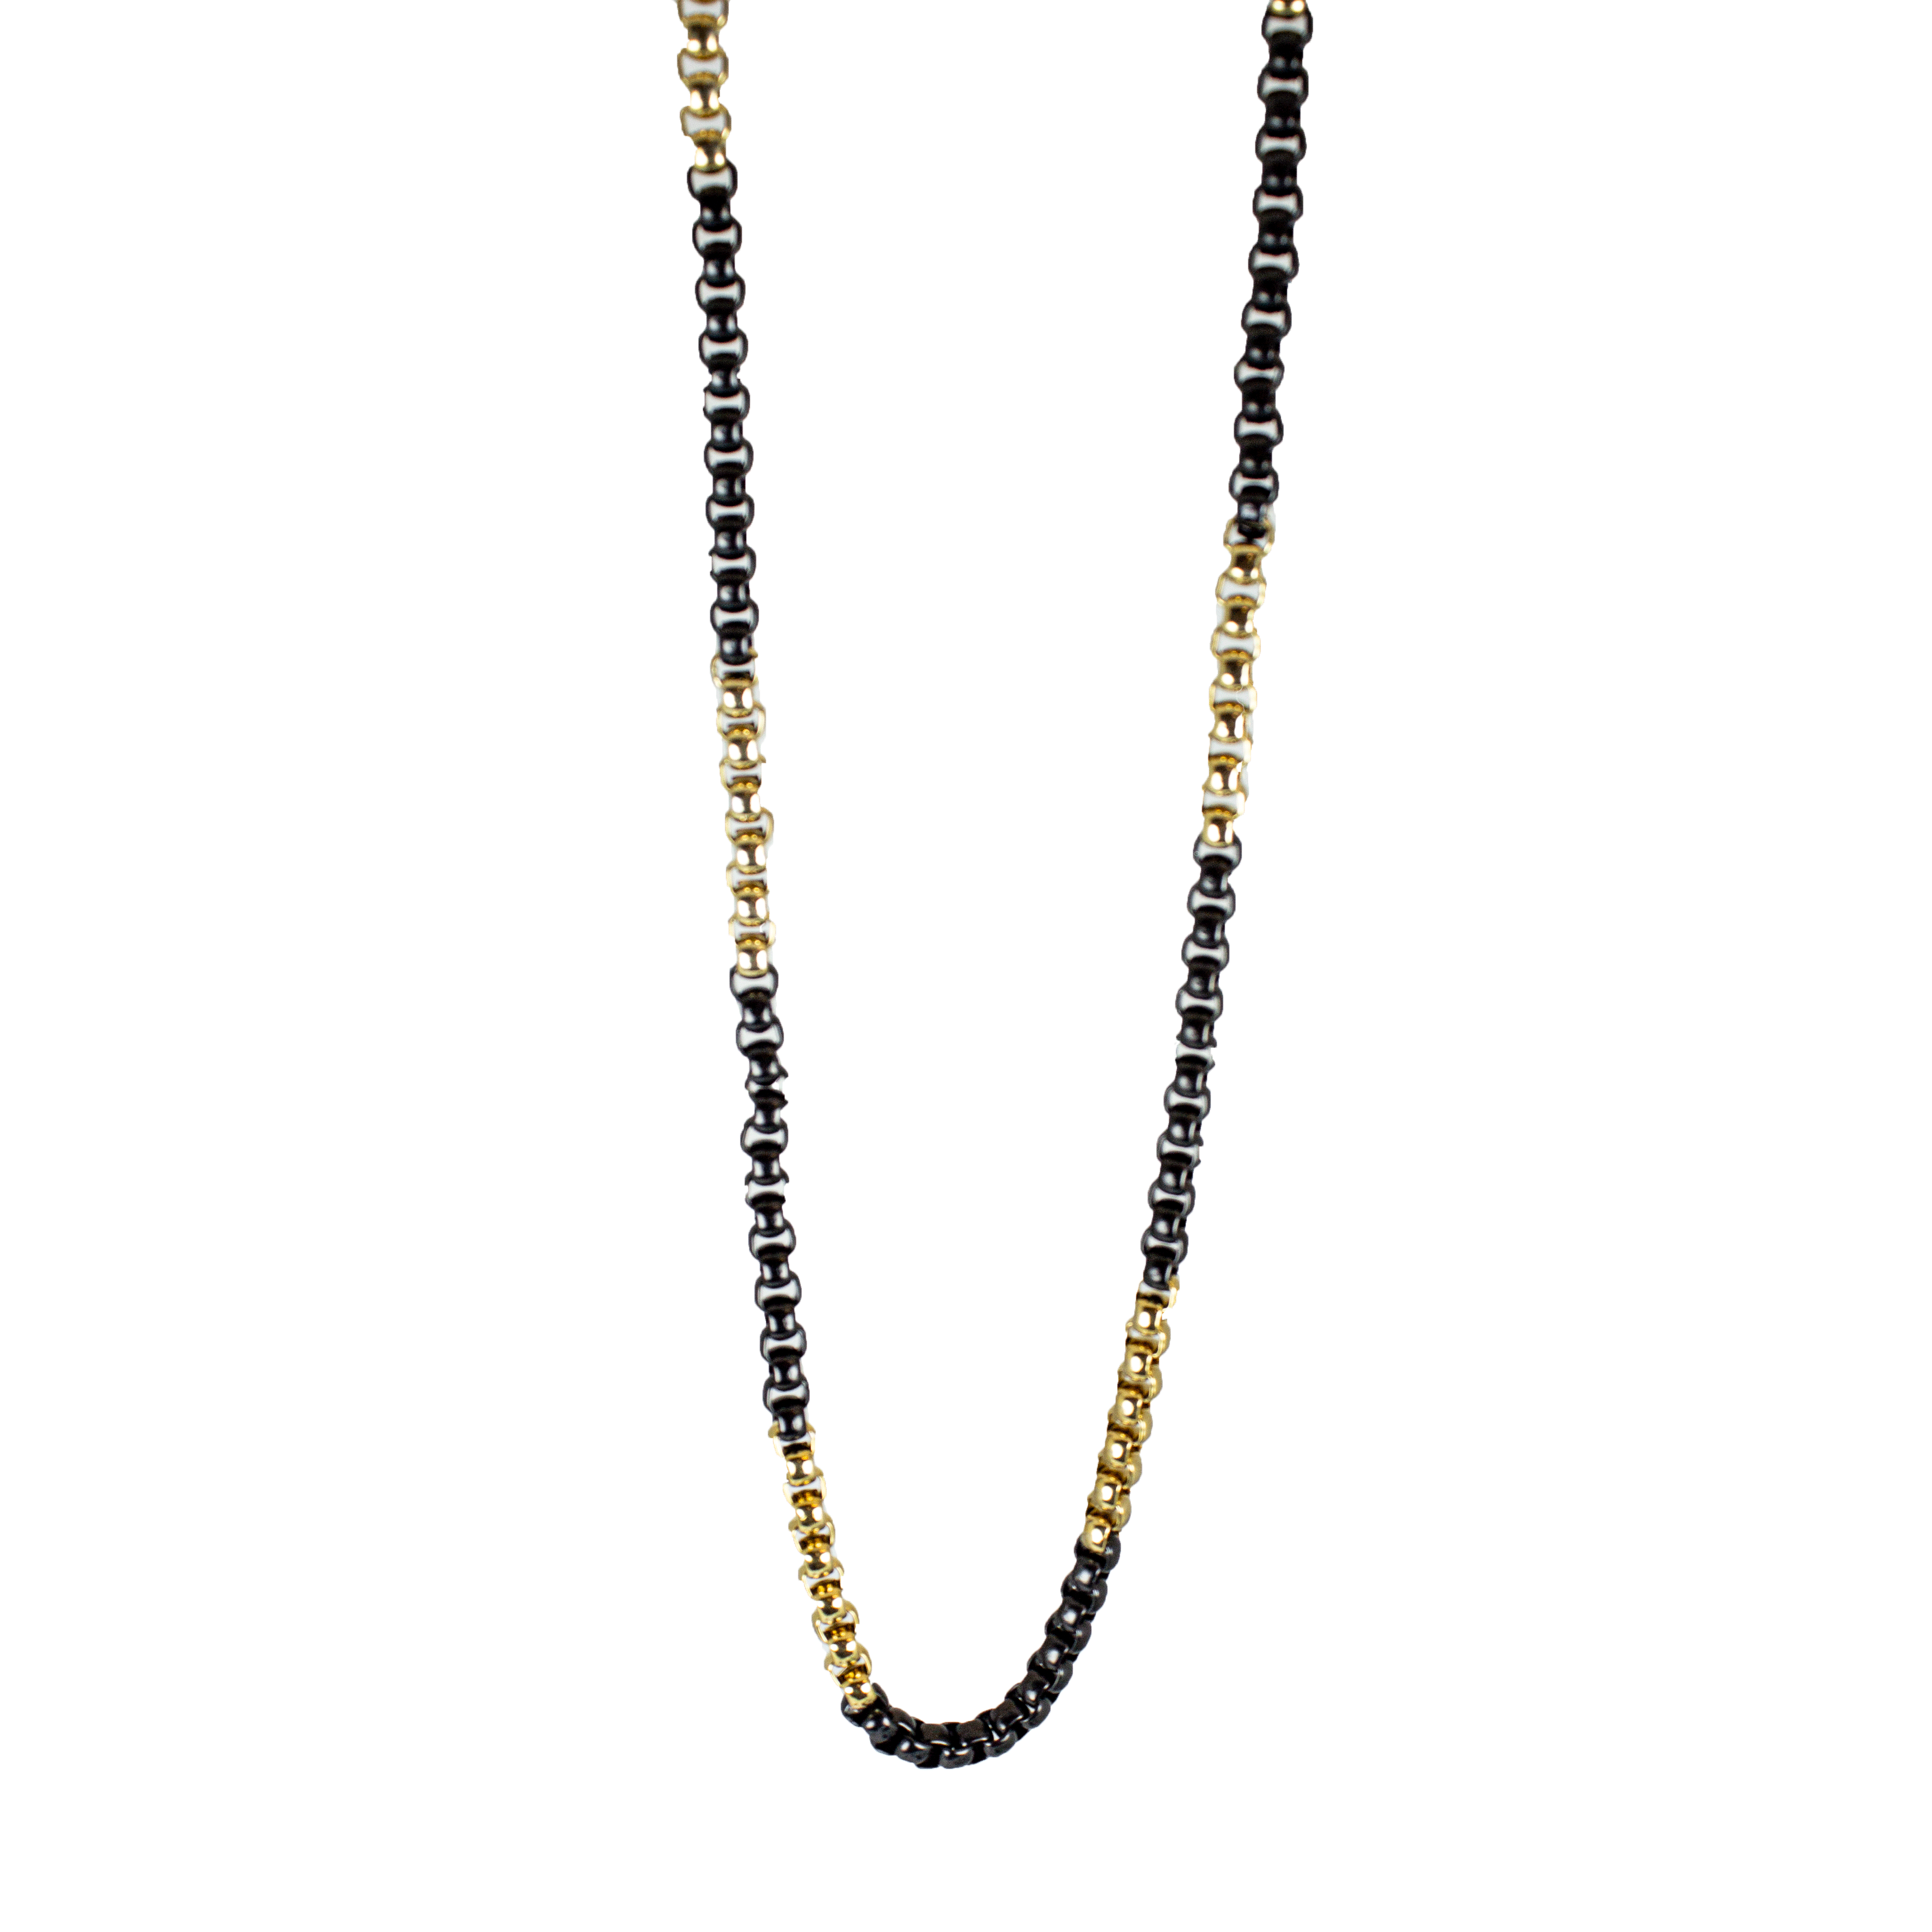 BOL Men's Two Tone Gold & Black Stainless Steal Chain Necklace